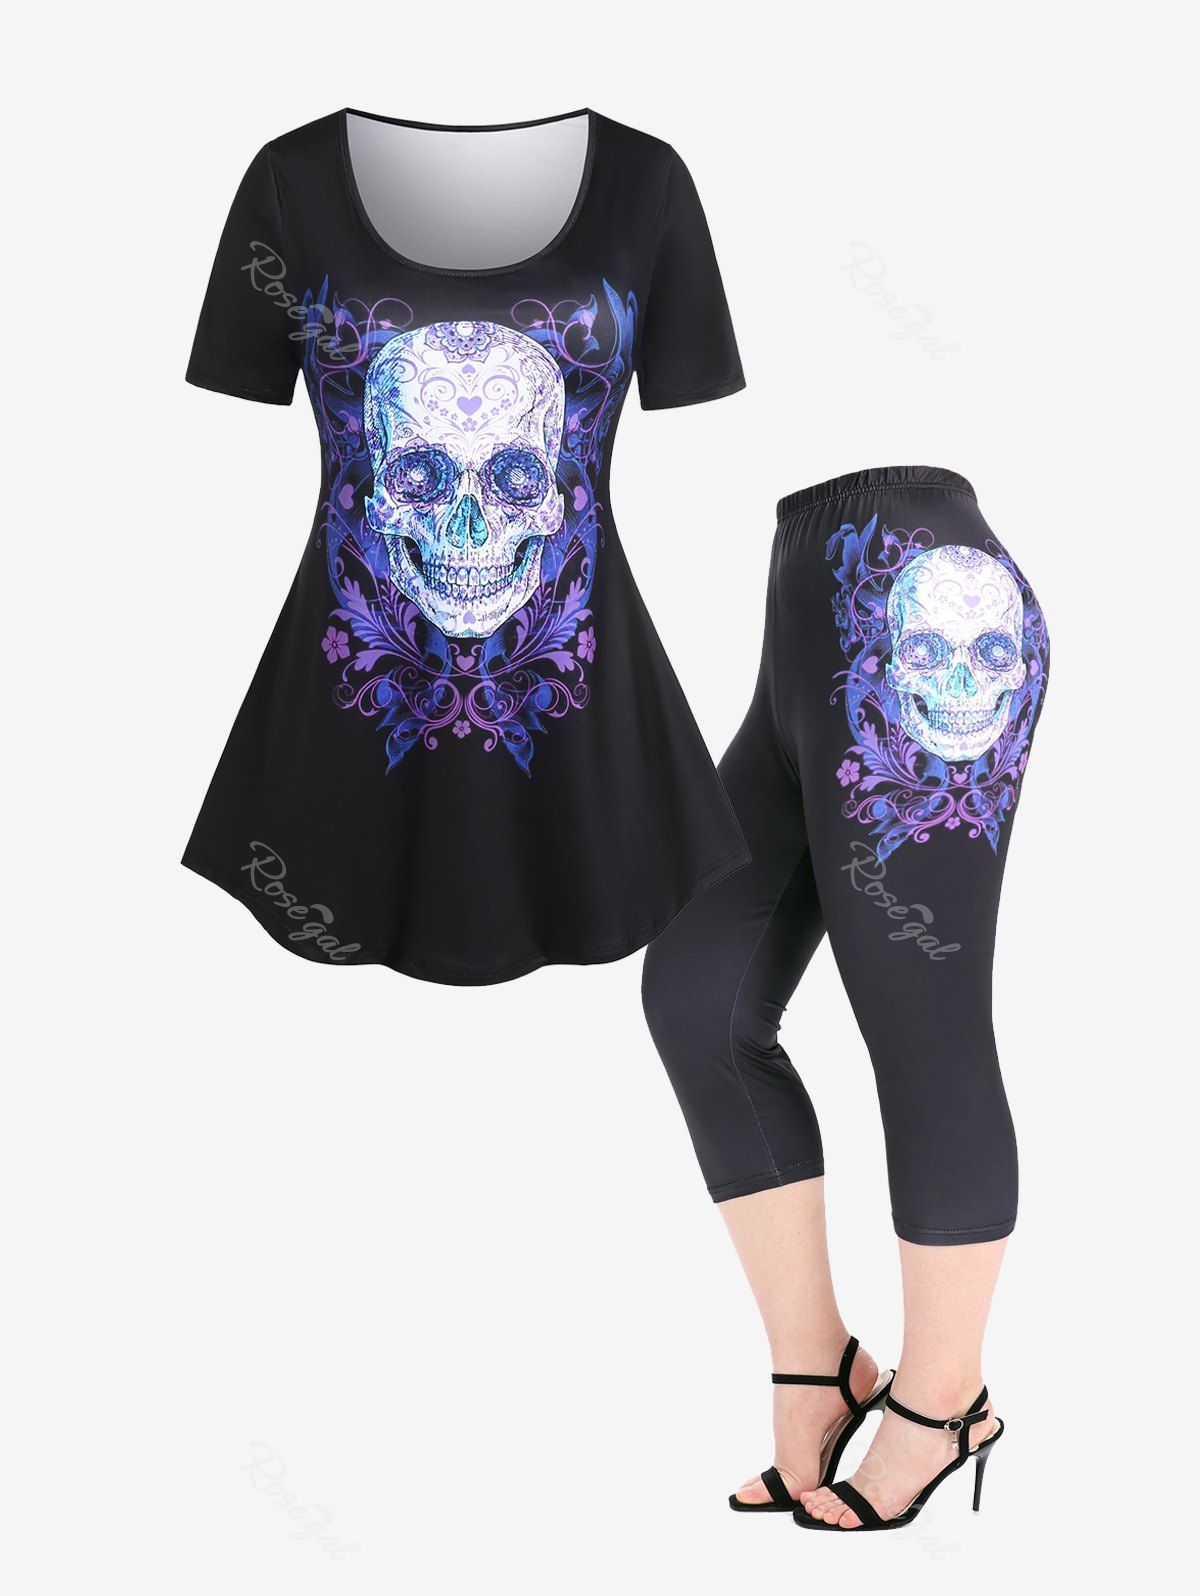 Shop Skull Printed Gothic Tee and Skull Printed Skinny Leggings Plus Size Summer Outfit  